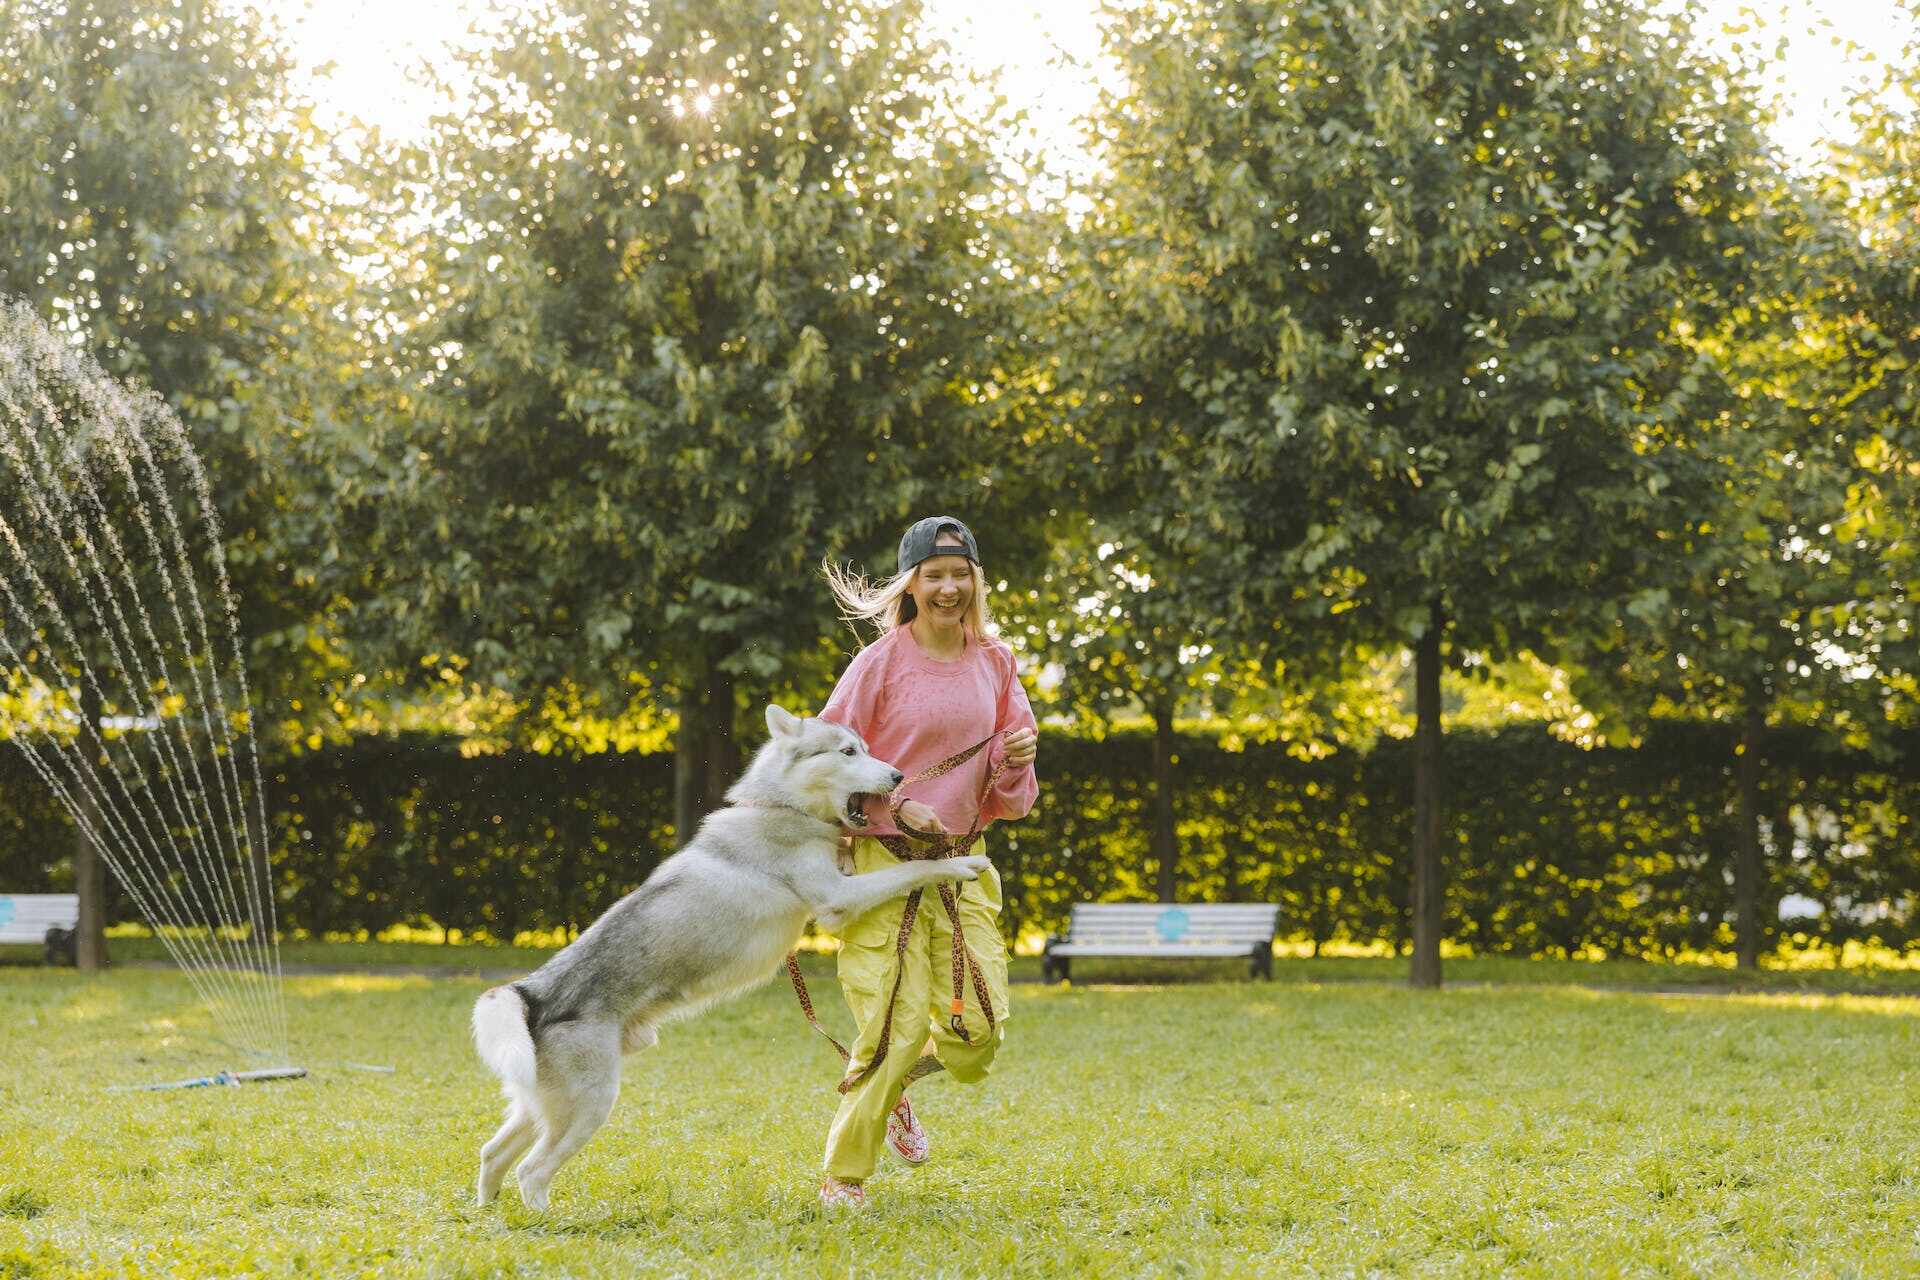 A woman playing with her dog in a lawn